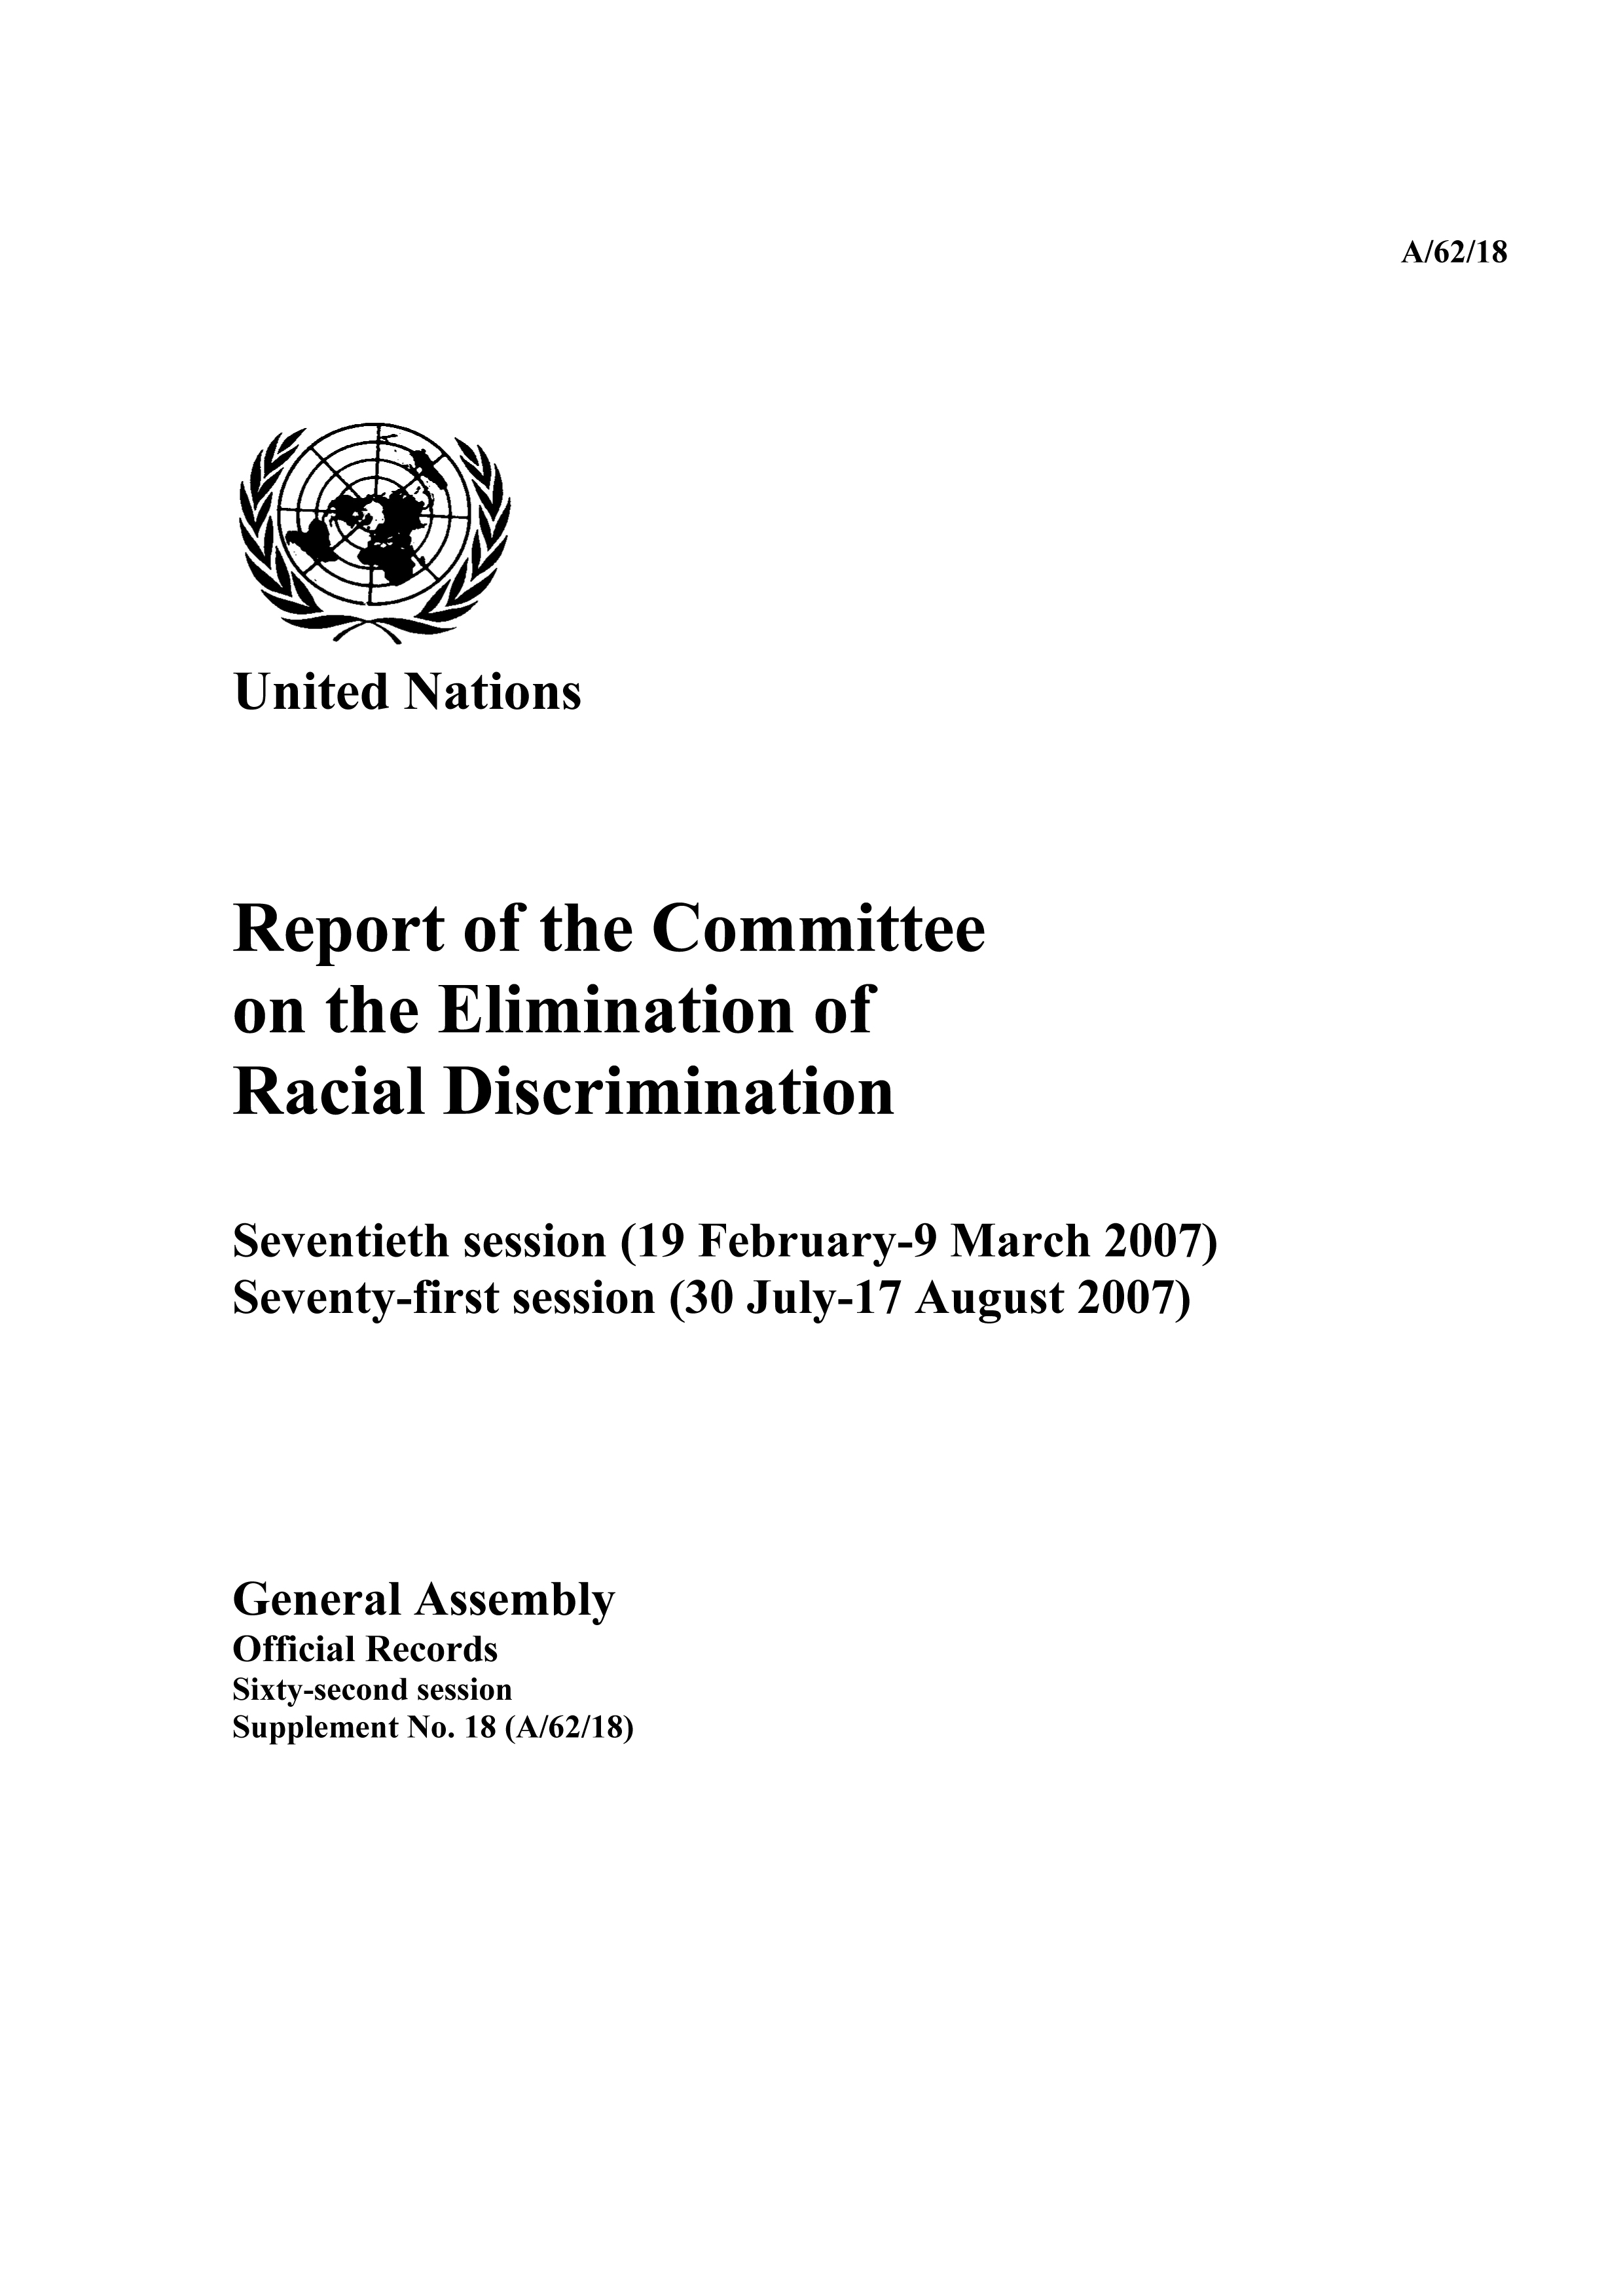 image of Report of the Committee on the Elimination of Racial Discrimination, Sixty-second Session